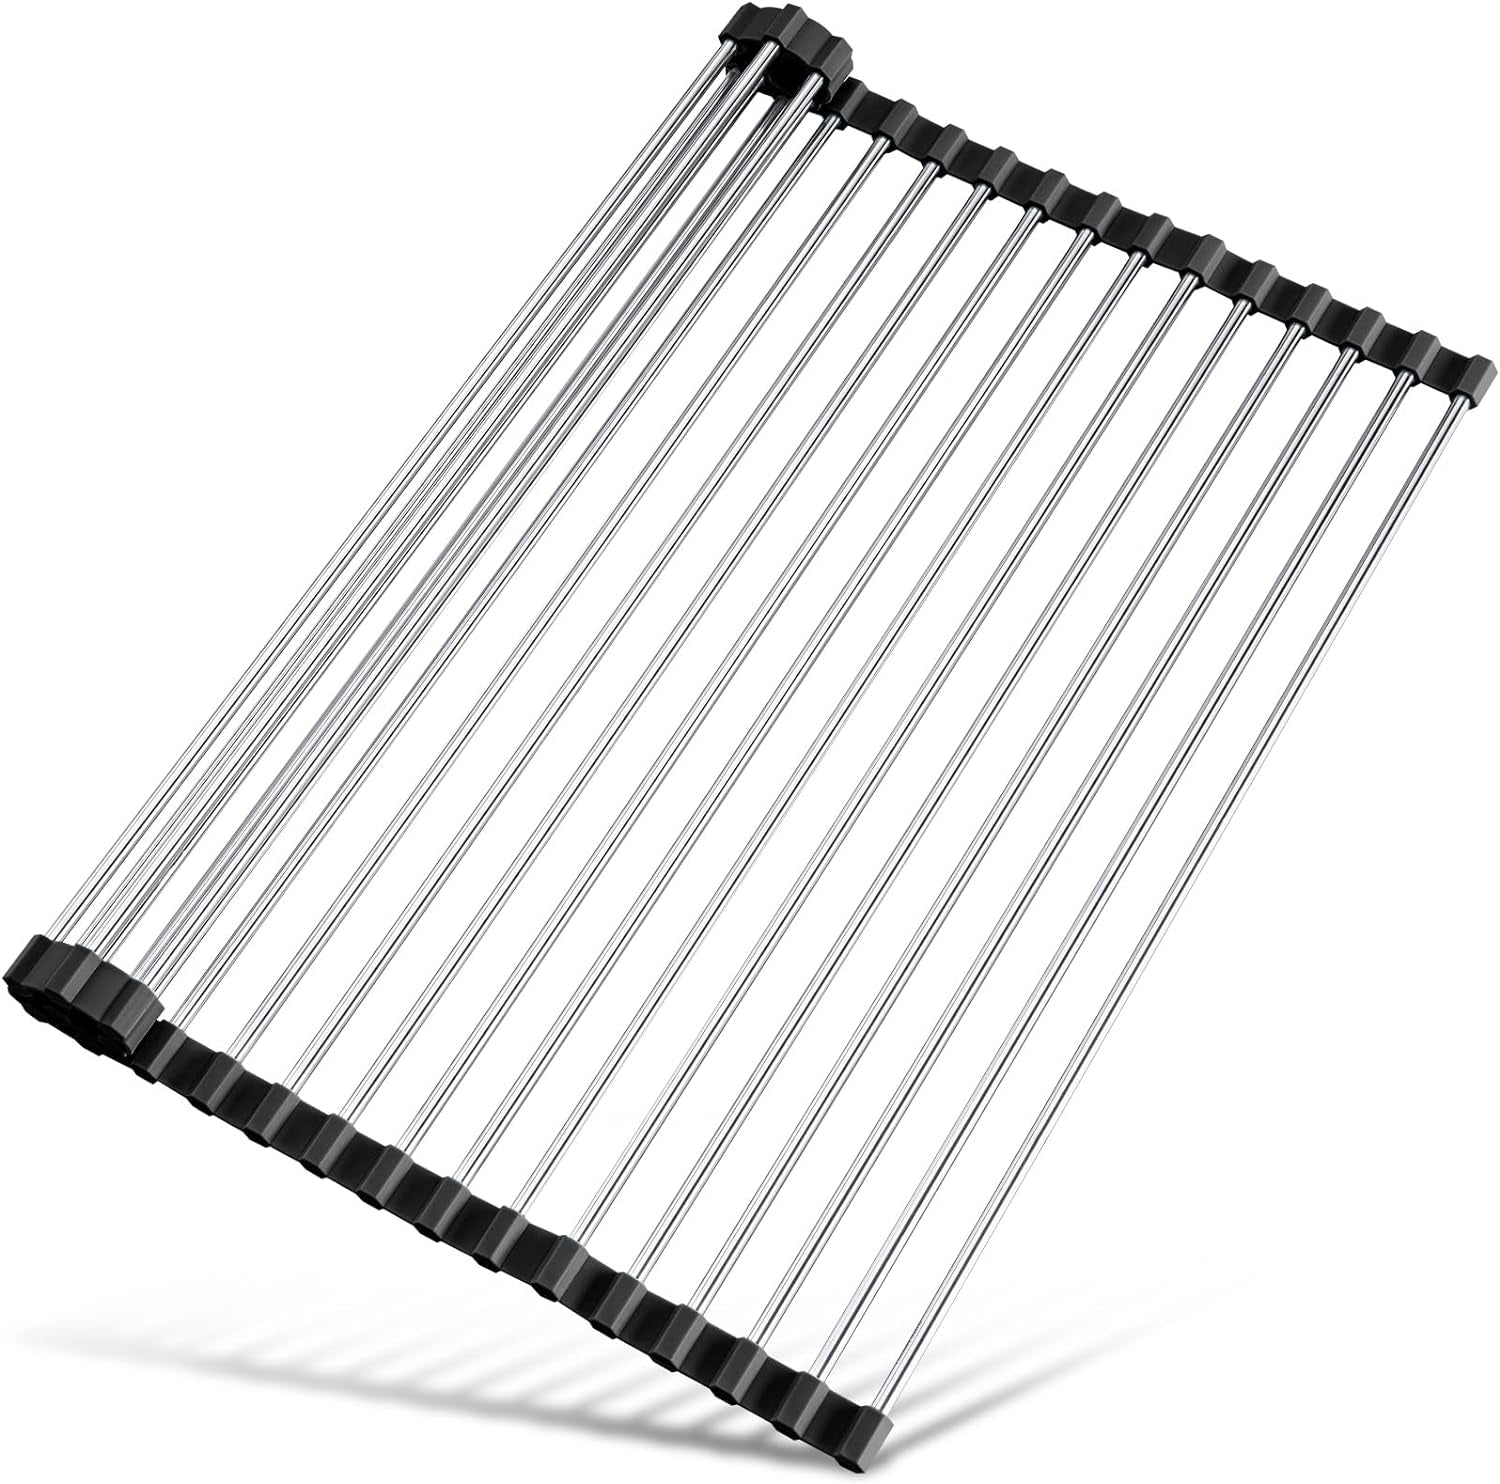 17.7" X 15.5" Roll up Dish Drying Rack over Sink Drying Rack Sink Cover Kitchen Sink Accessories Gadget Multipurpose Organizer Foldable Stainless Steel Drainer (Grey)